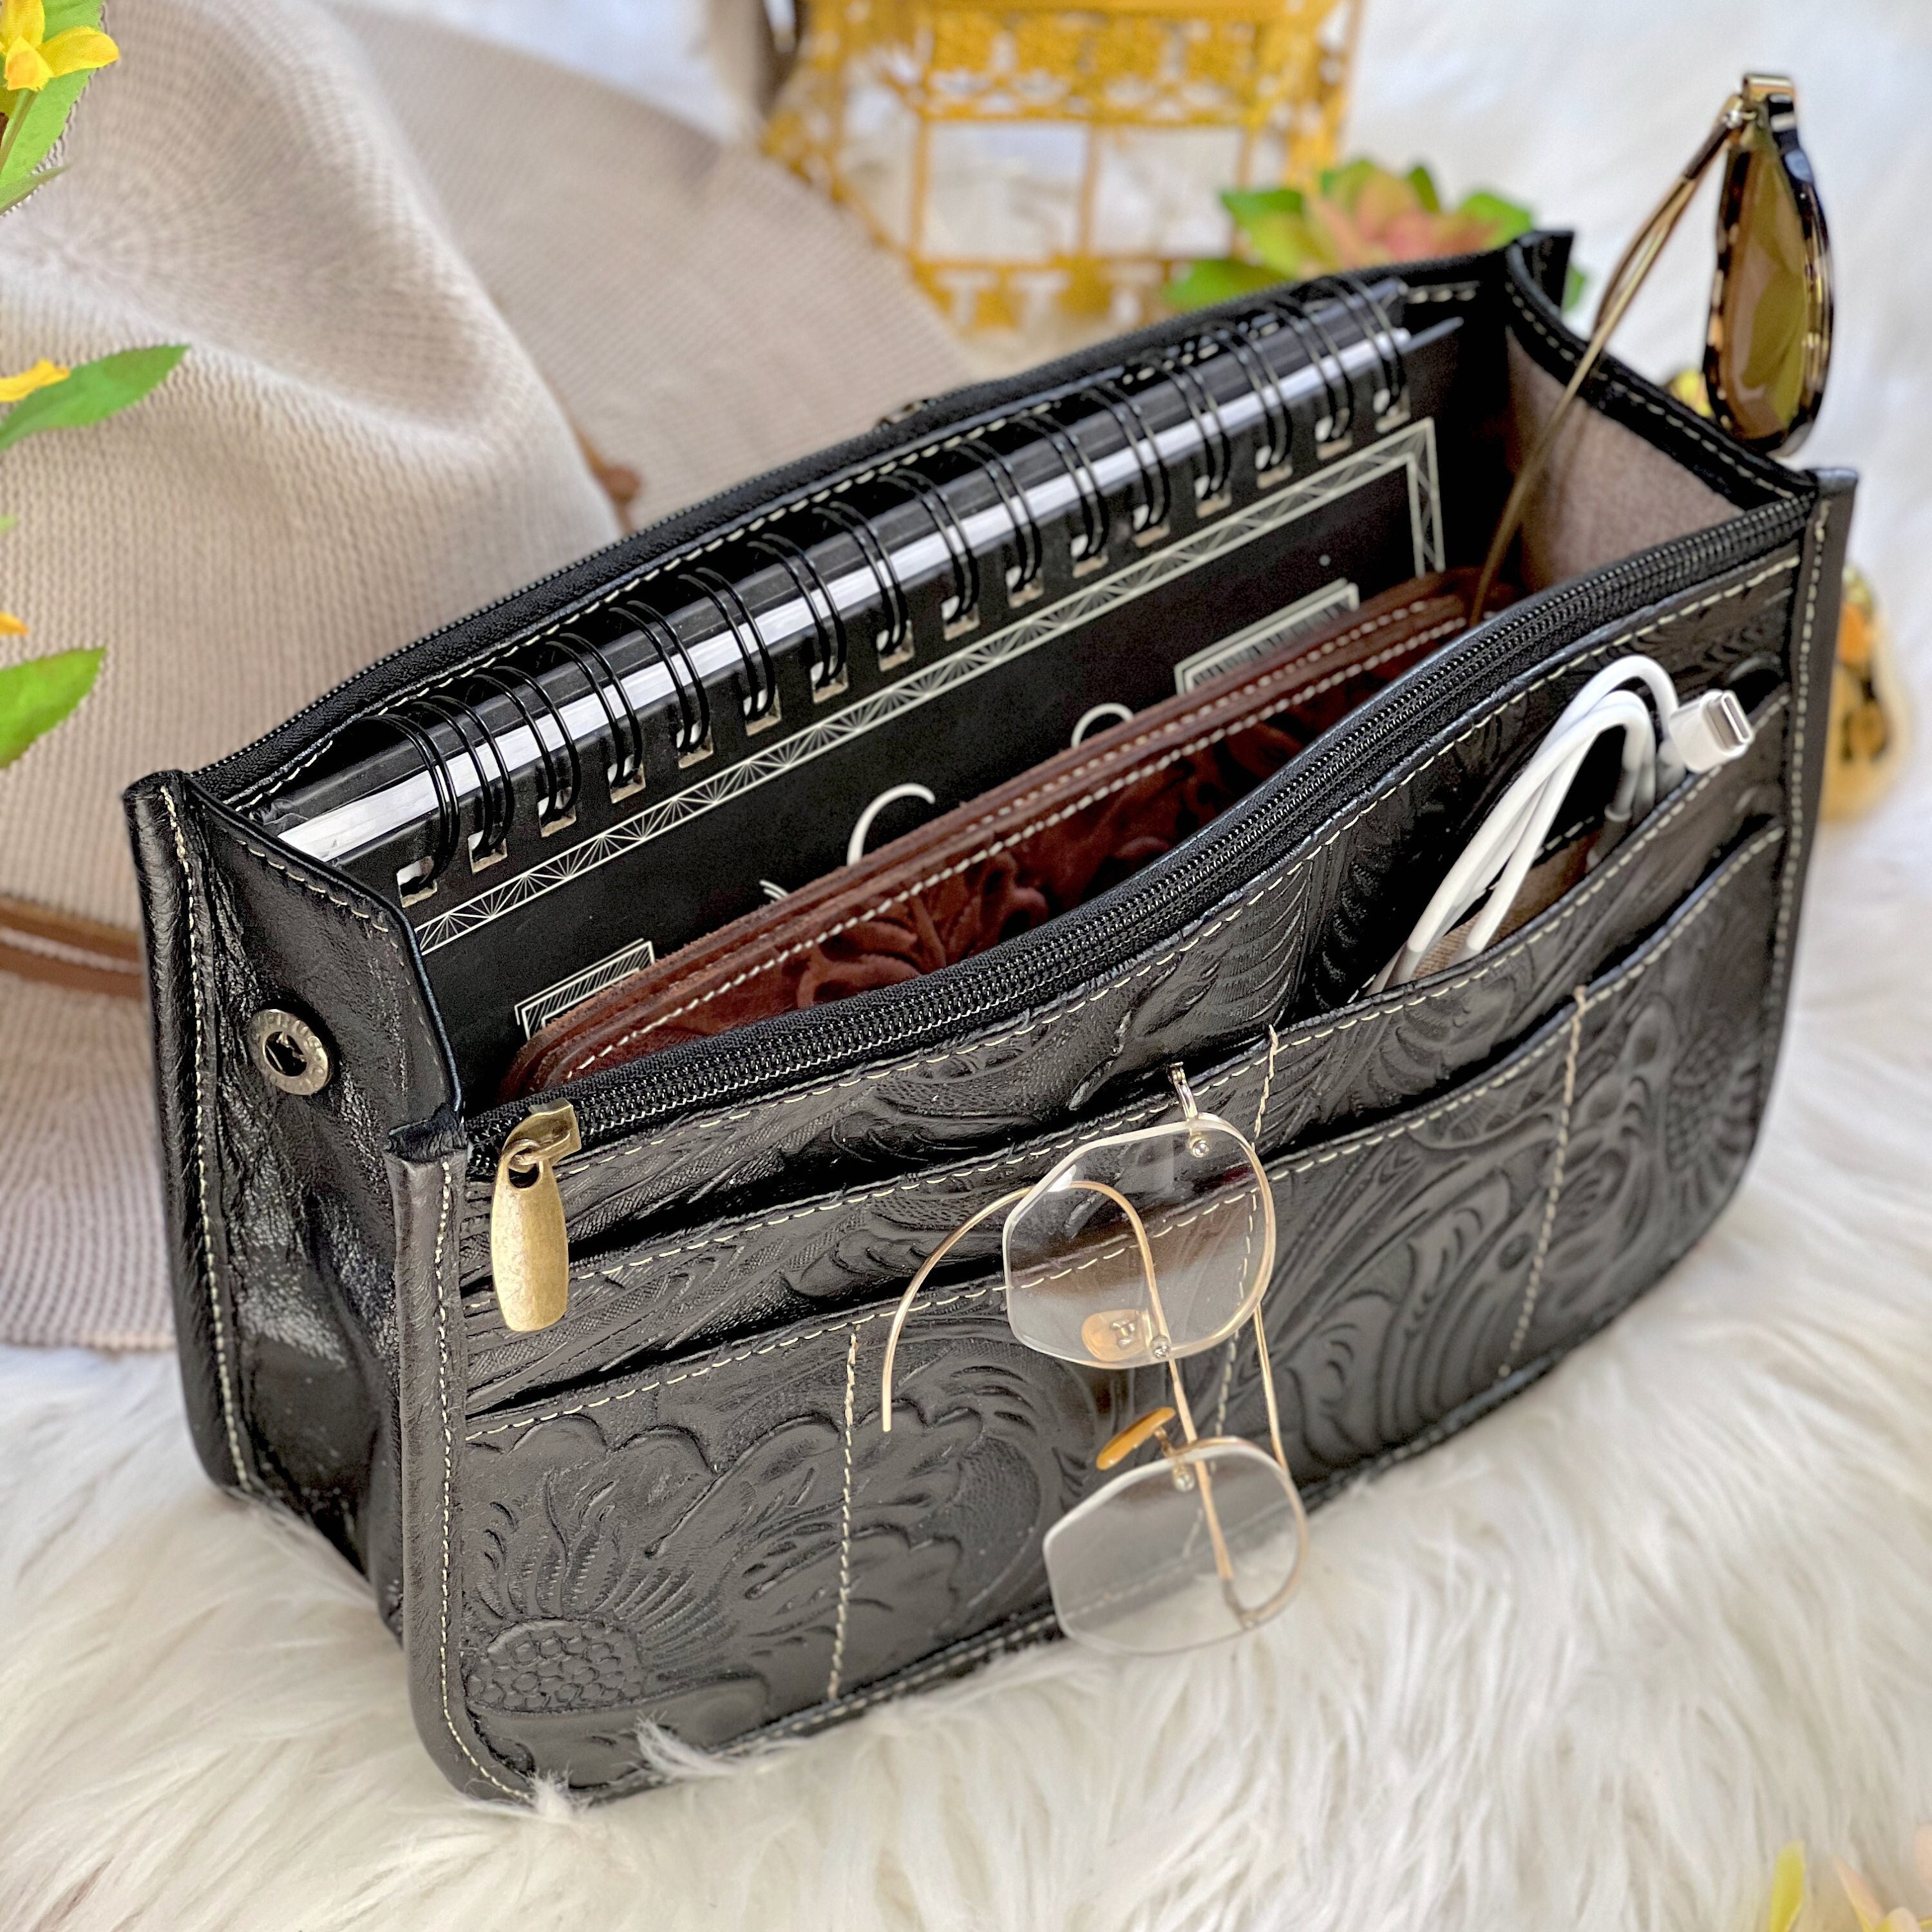 Nylon Purse Organizer for LV Alma BB Inserts with a Zipper Closer  Waterproof Bag in Bag Shapers